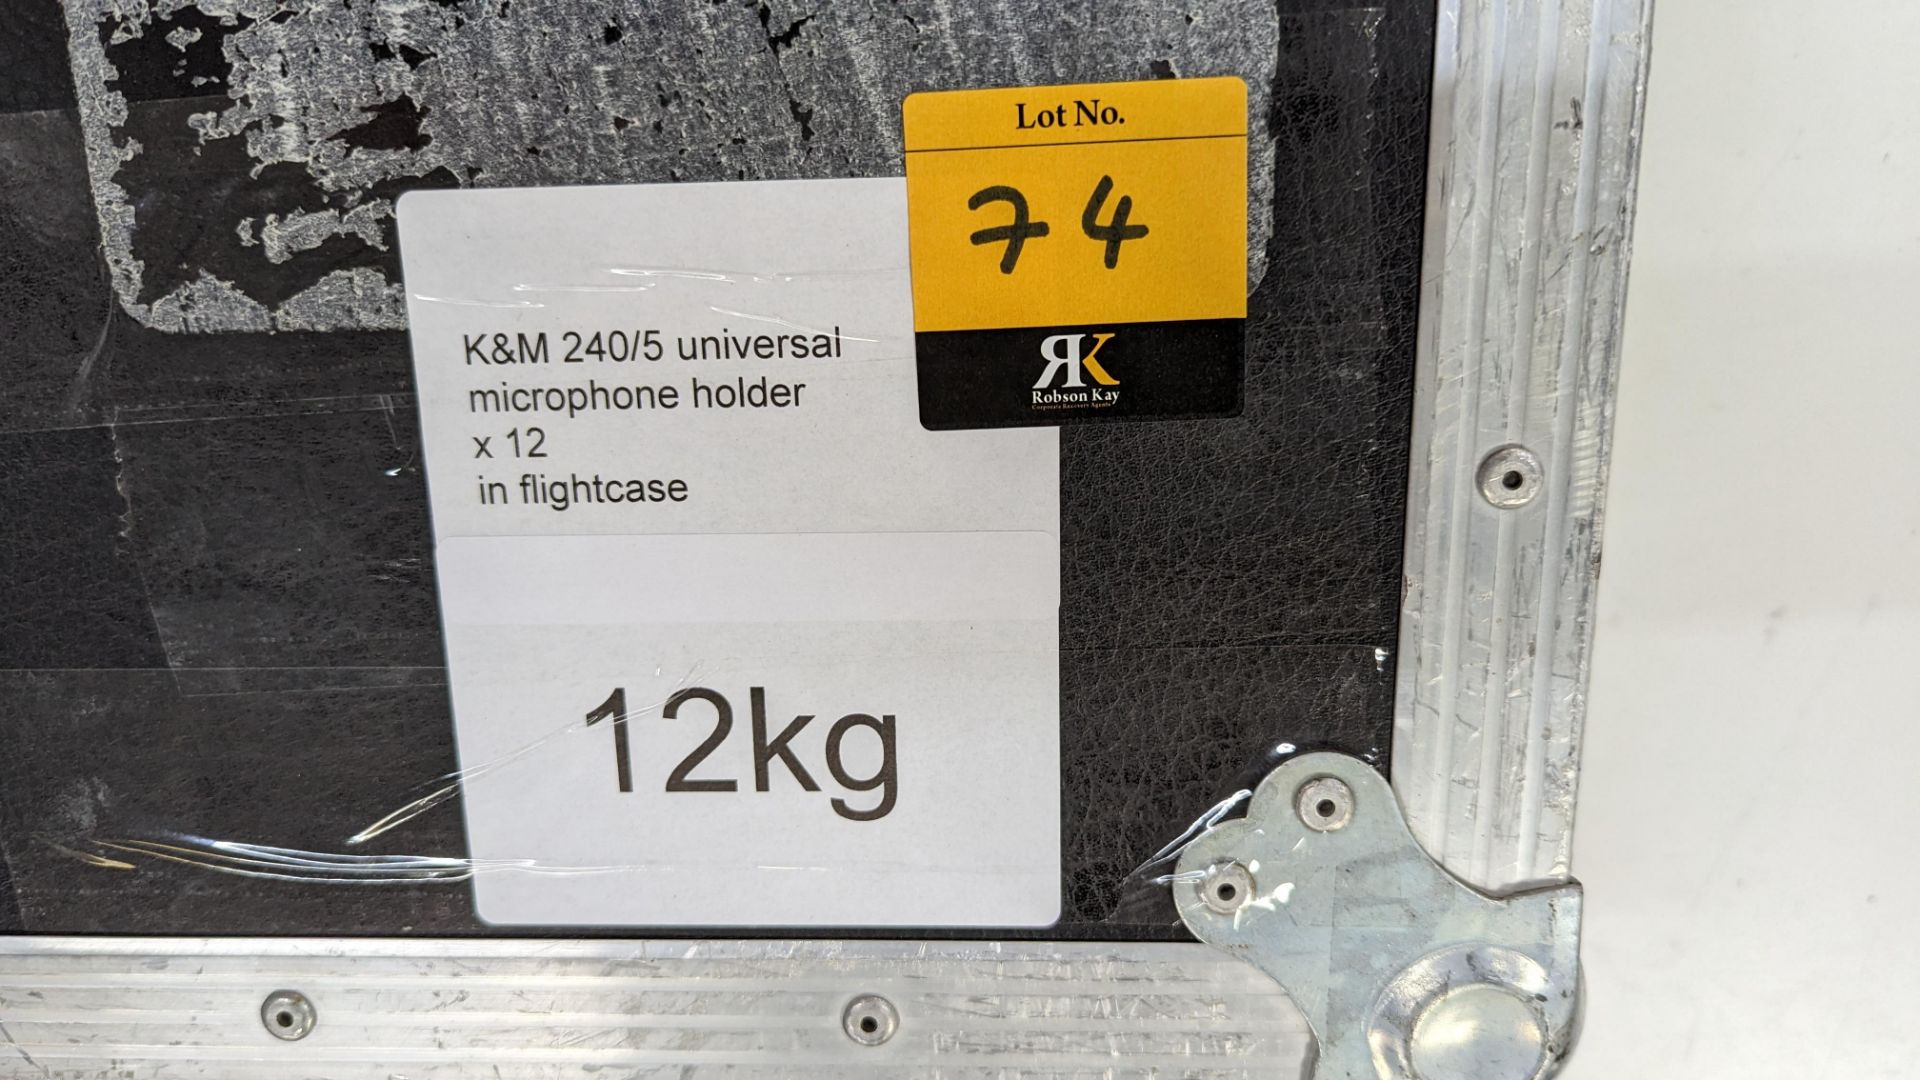 12 off K&M model 240/5 universal microphone holders. Including flight case. Total lot weight: 12kg - Image 9 of 10